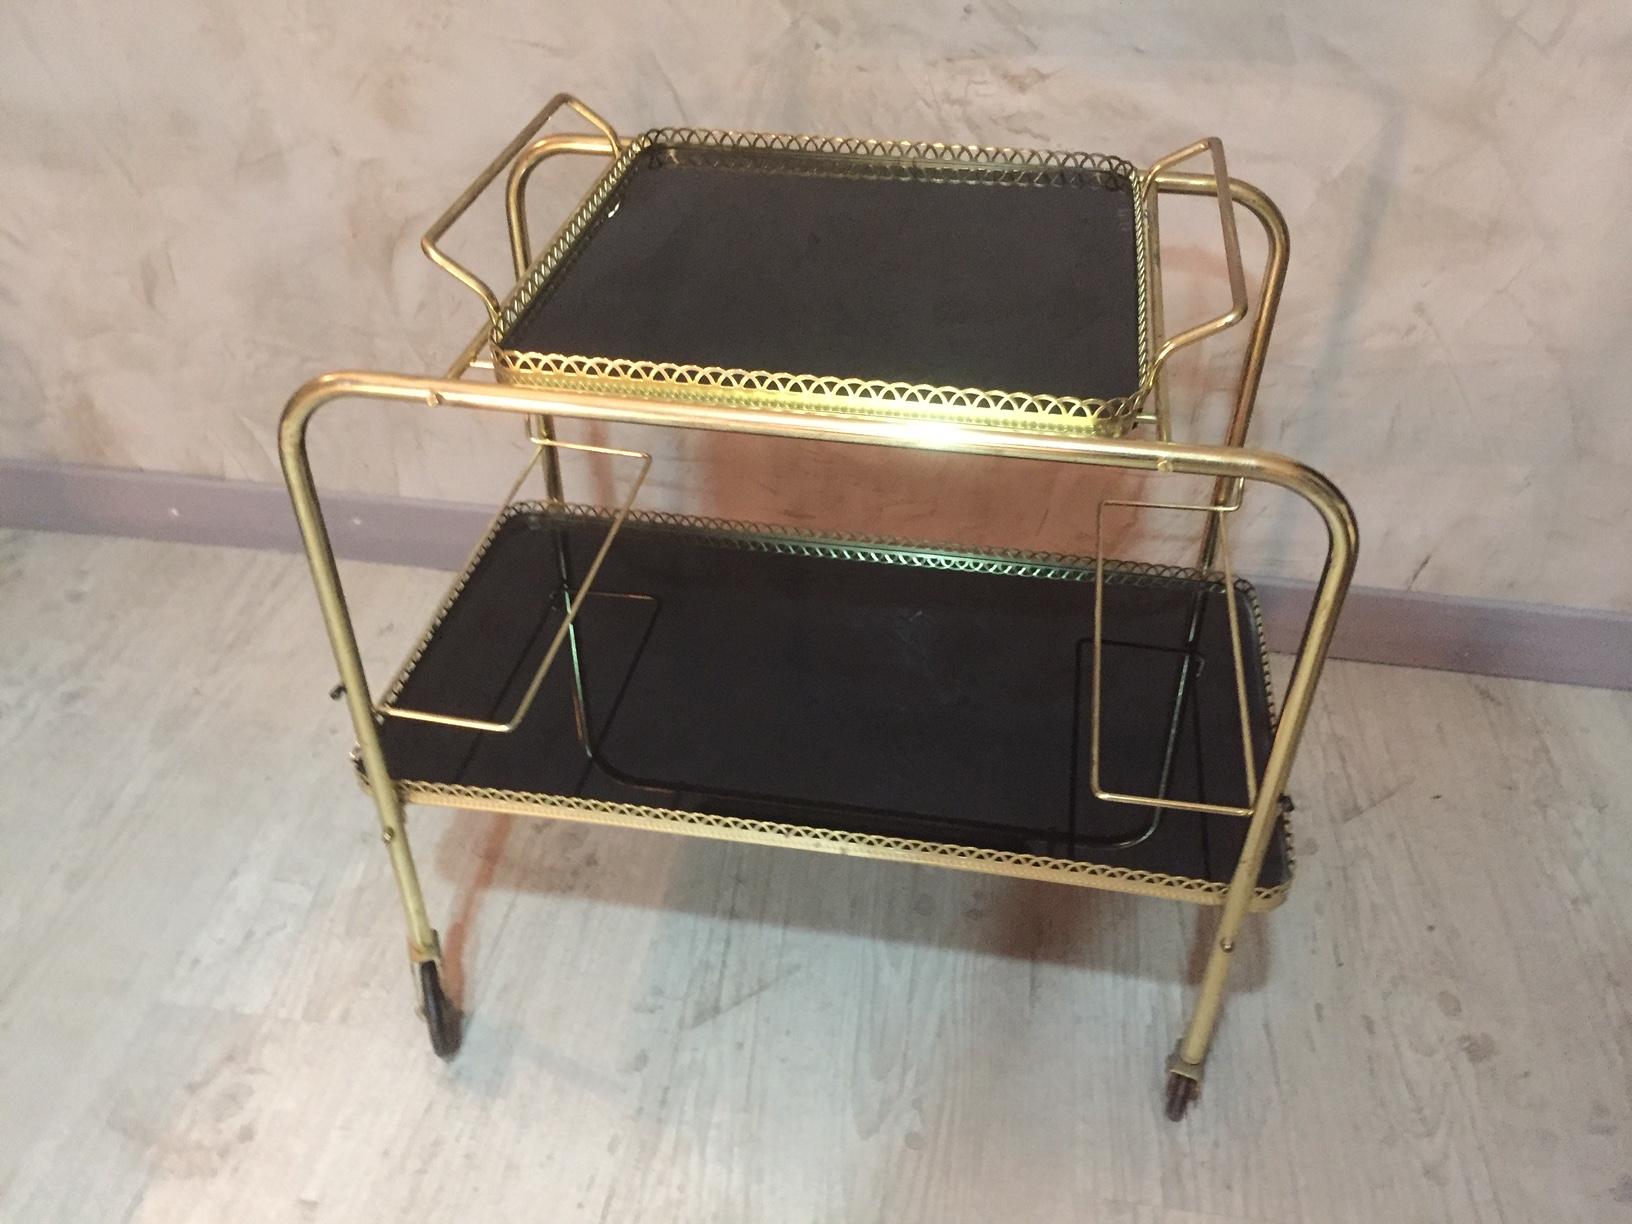 Beautiful 20th century, French gilded brass rolling cart from the 1960s.
The tray is removable and made with black glass. Gilded brass gallery.
Good condition.